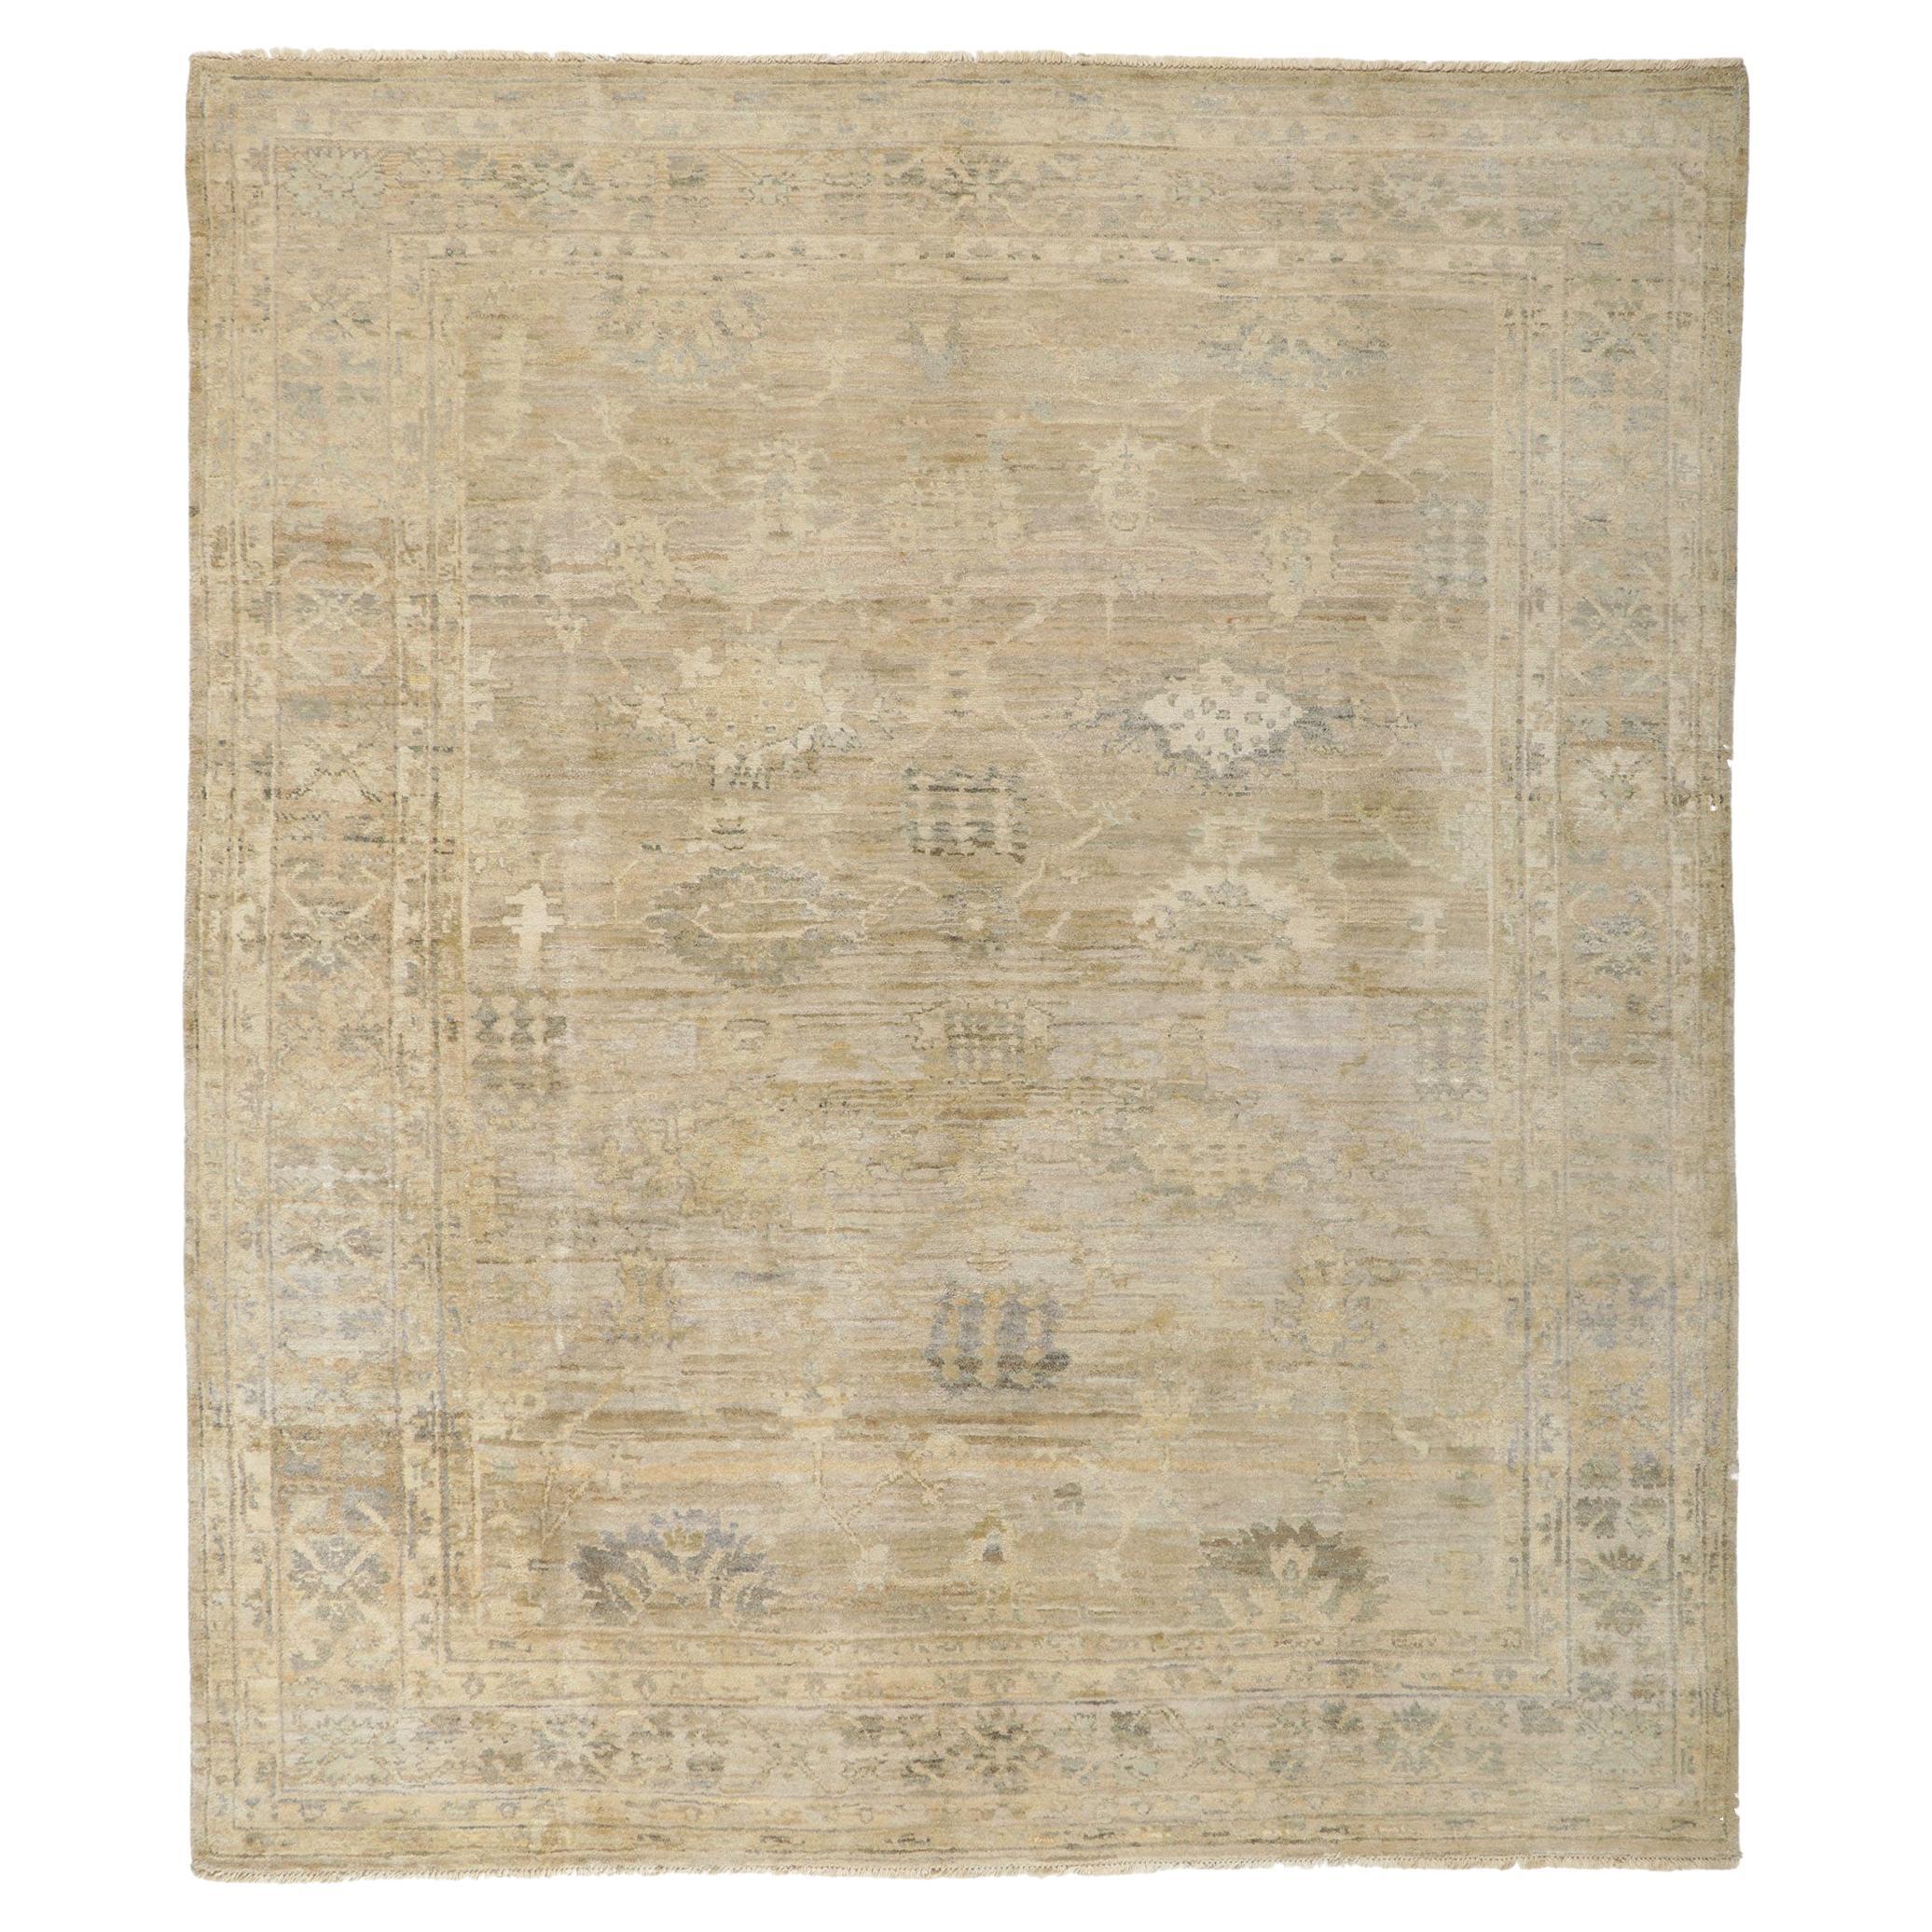 New Soft Earth-Tone Oushak Rug  For Sale